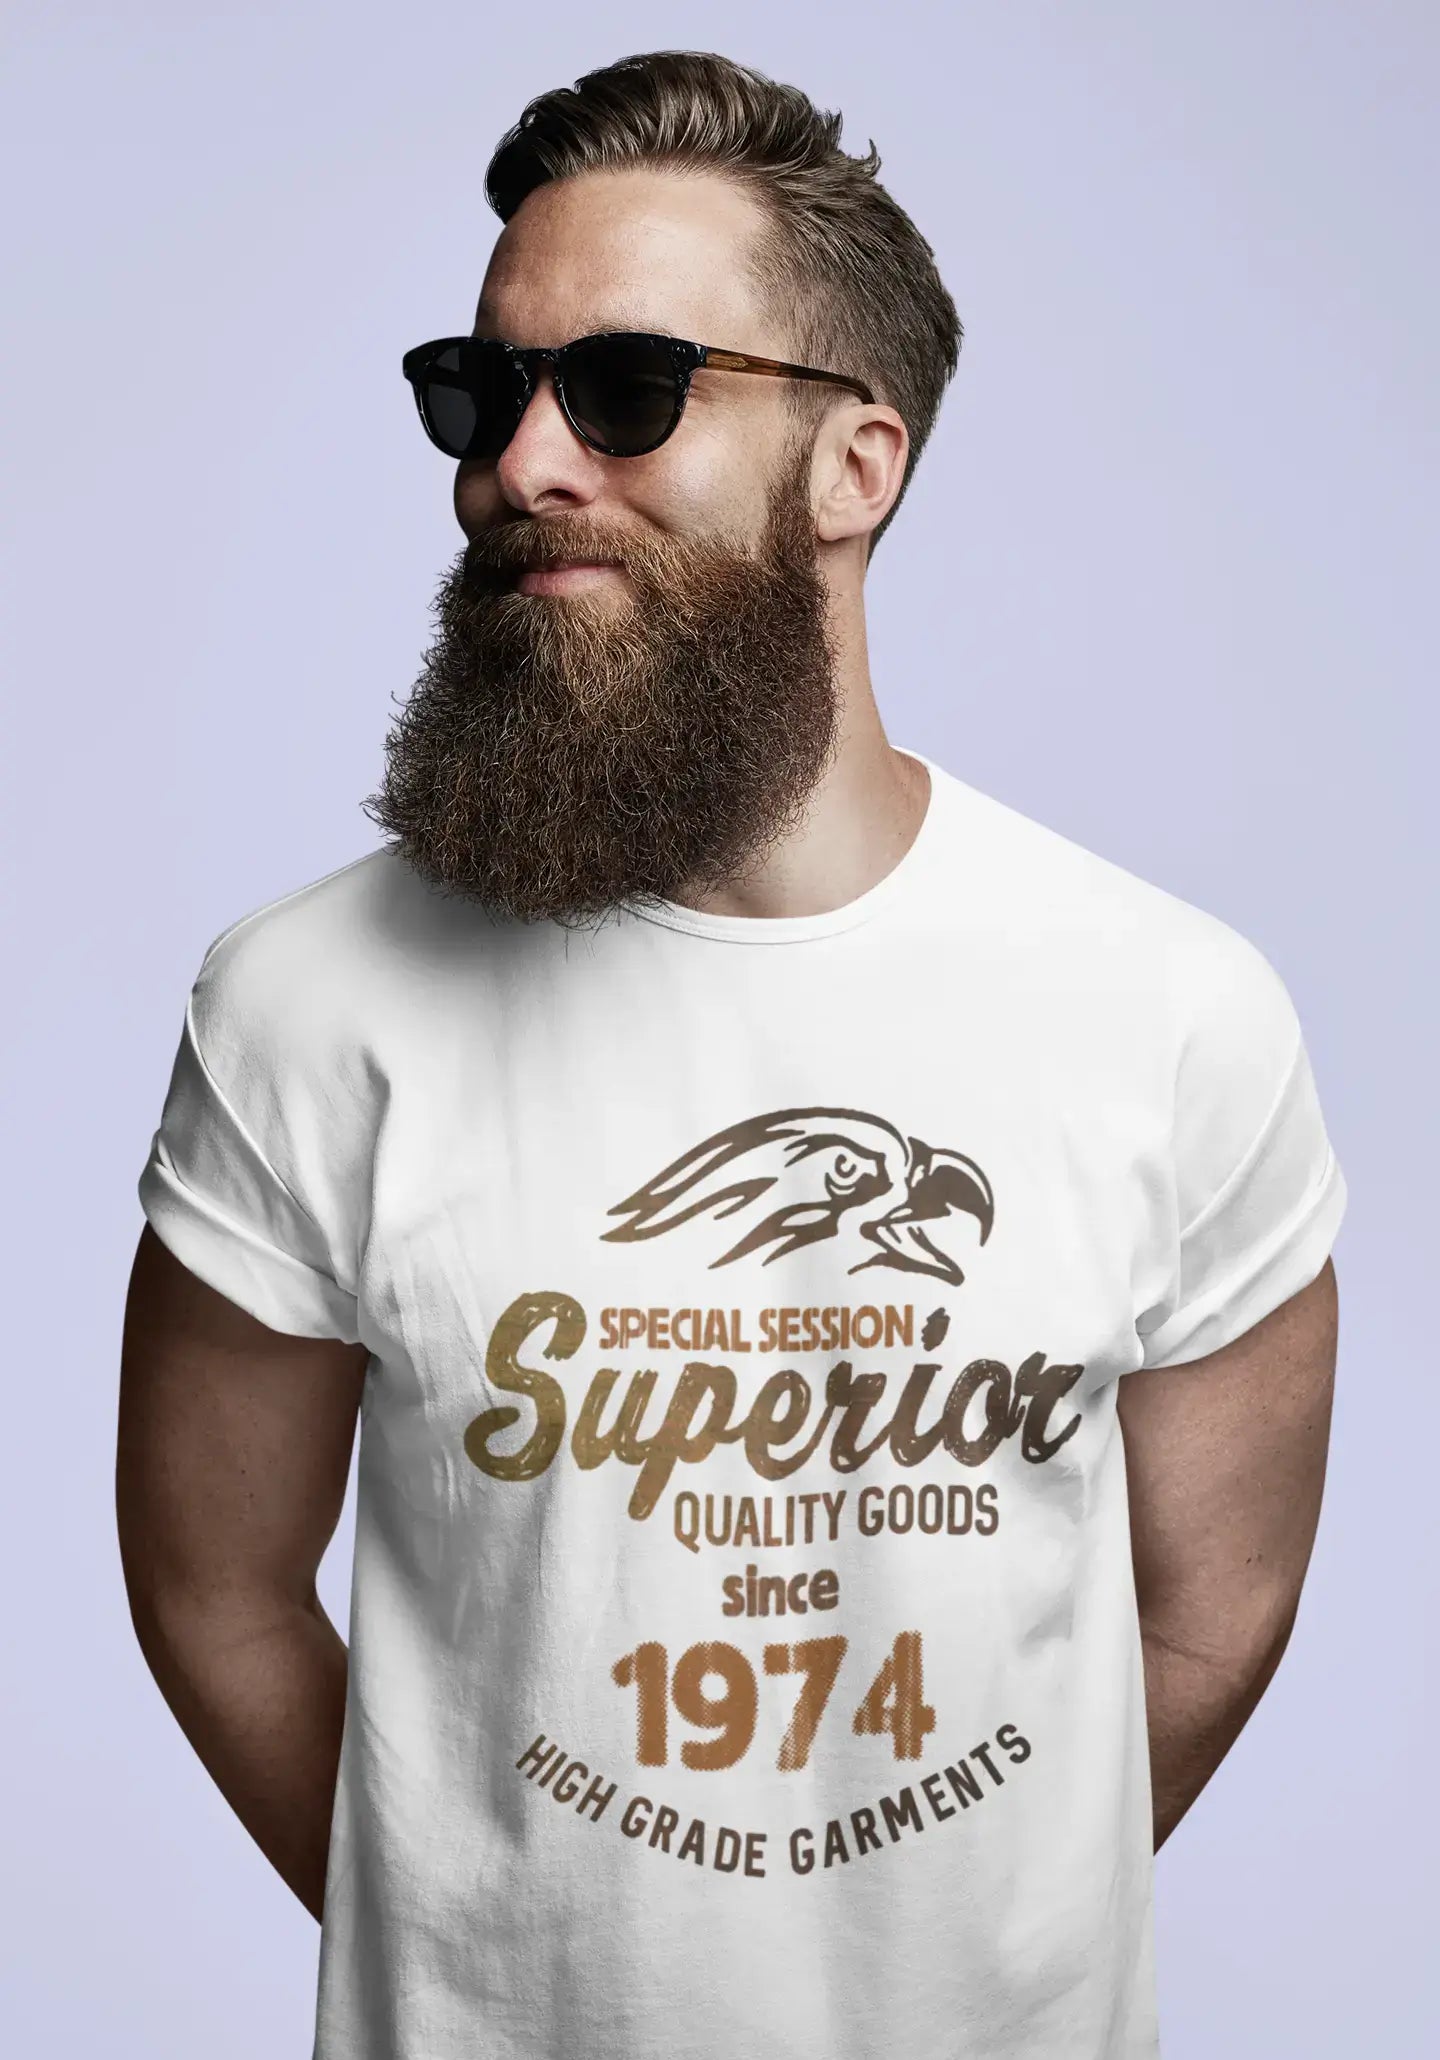 Homme Tee Vintage T Shirt 1974, Special Sessions Superior Since 1974